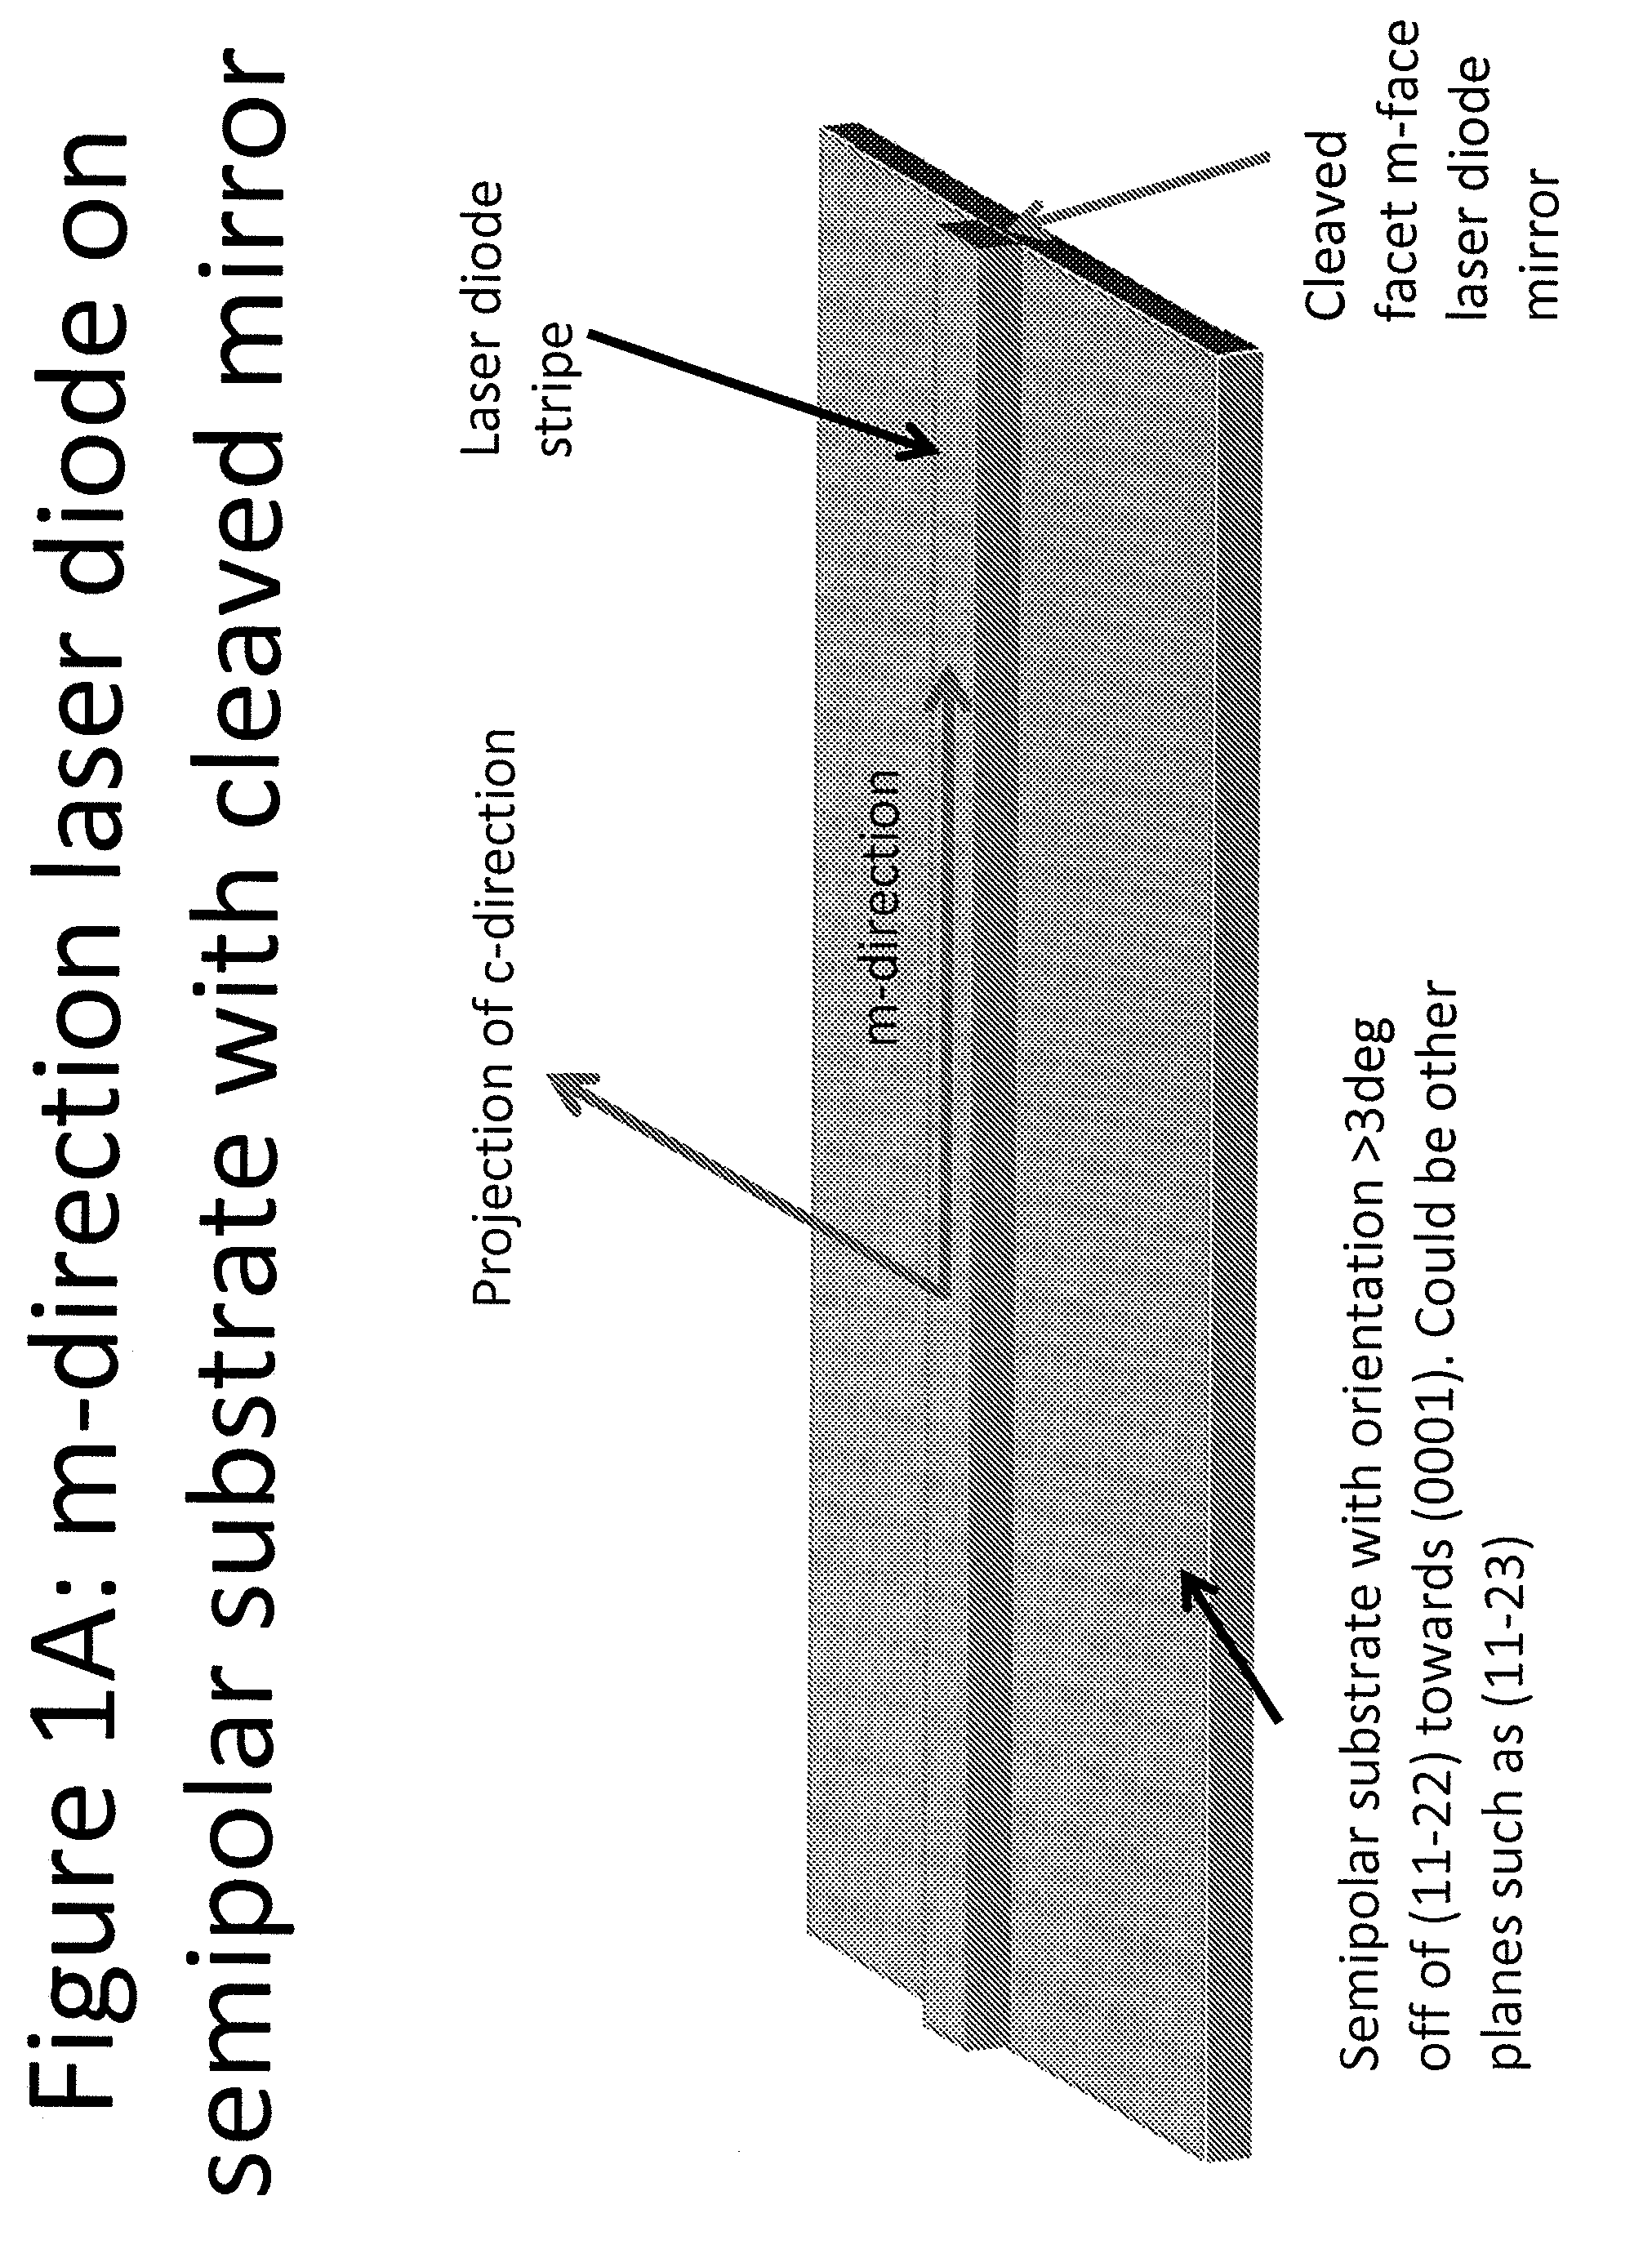 Optical device structure using GaN substrates and growth structures for laser applications